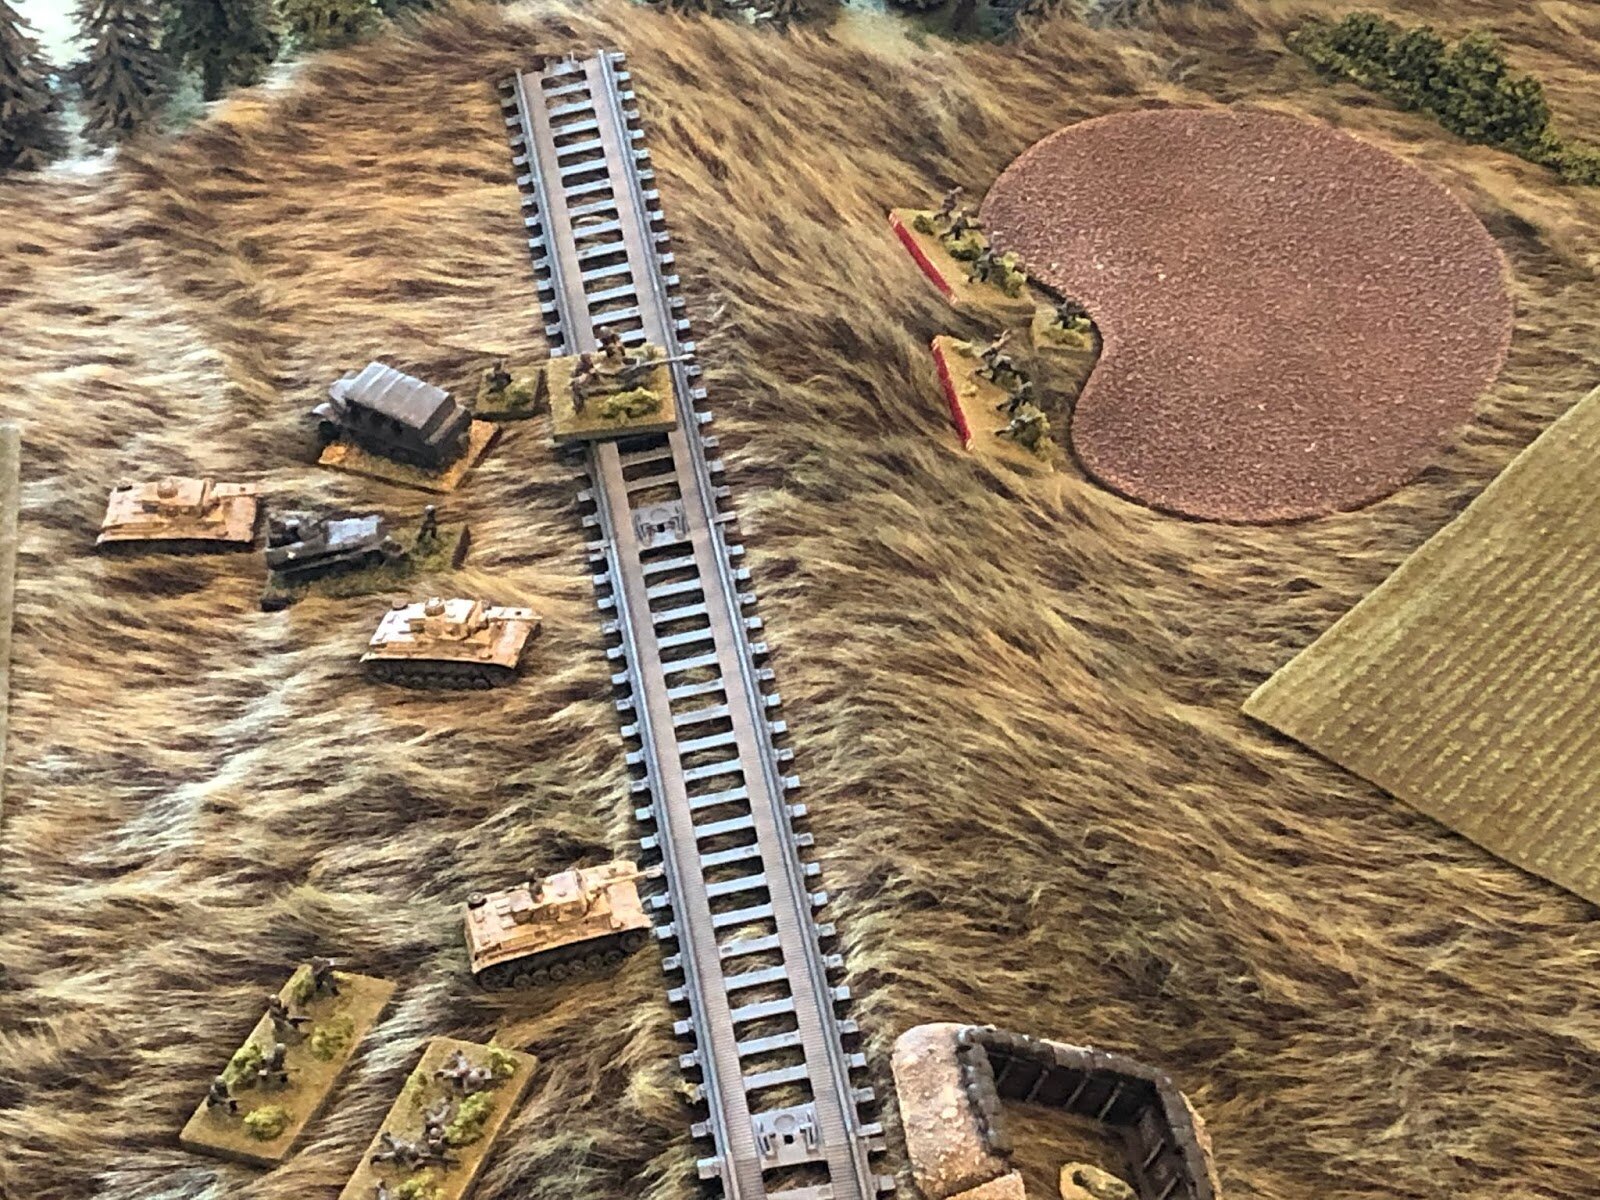  On the German left, with the Soviet tanks (off camera to right) preoccupied with the German tanks (left), the 2nd Plt, 2nd Company, pushes down the east slope of the railway embankment (center top right, from top left).  